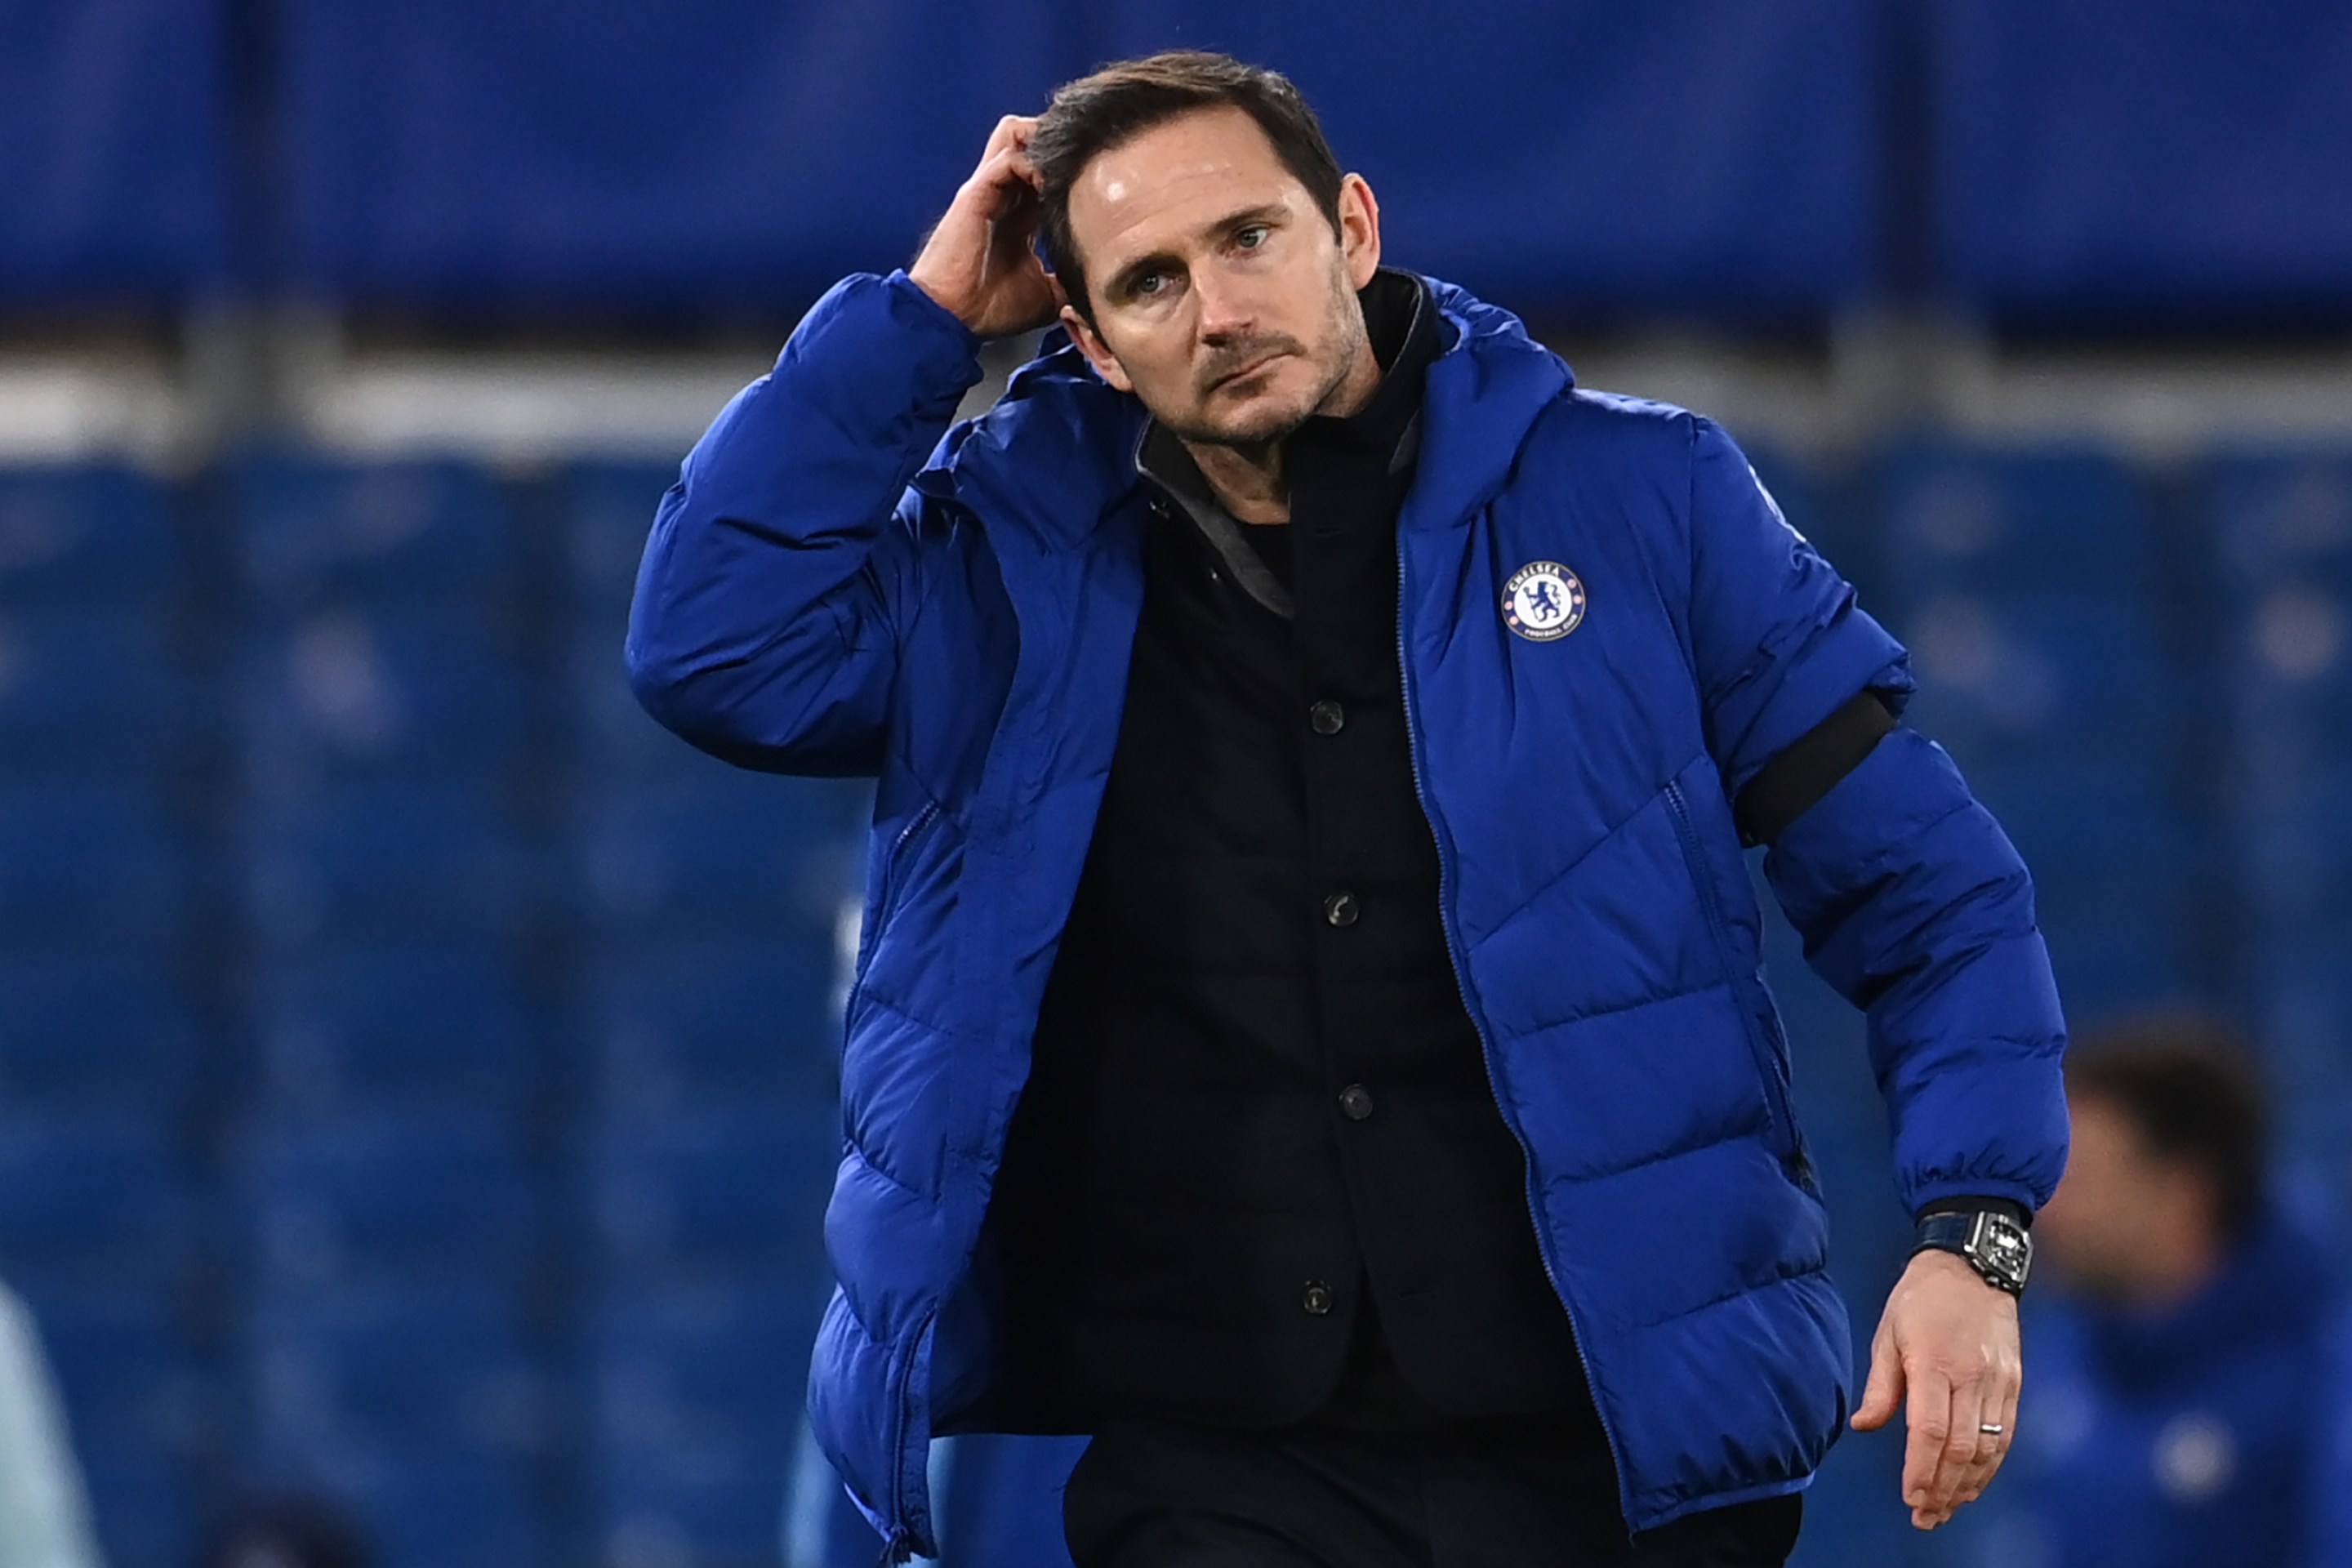 Chelsea's English head coach Frank Lampard reacts to their defeat on the pitch after the English Premier League football match between Chelsea and Manchester City at Stamford Bridge in London on January 3, 2021.